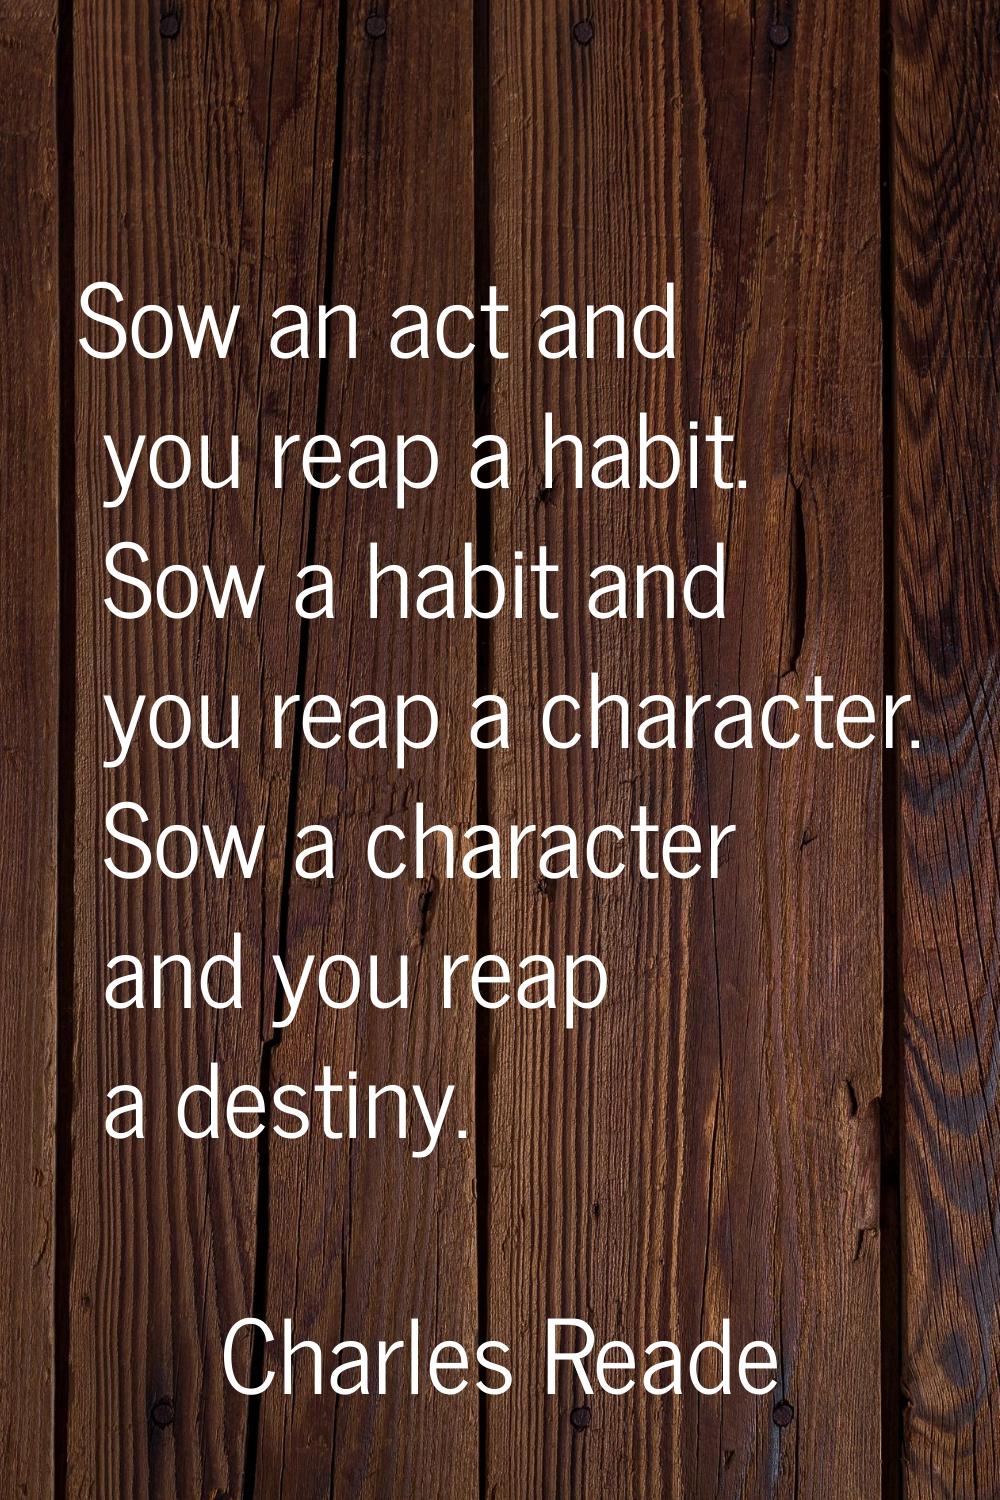 Sow an act and you reap a habit. Sow a habit and you reap a character. Sow a character and you reap